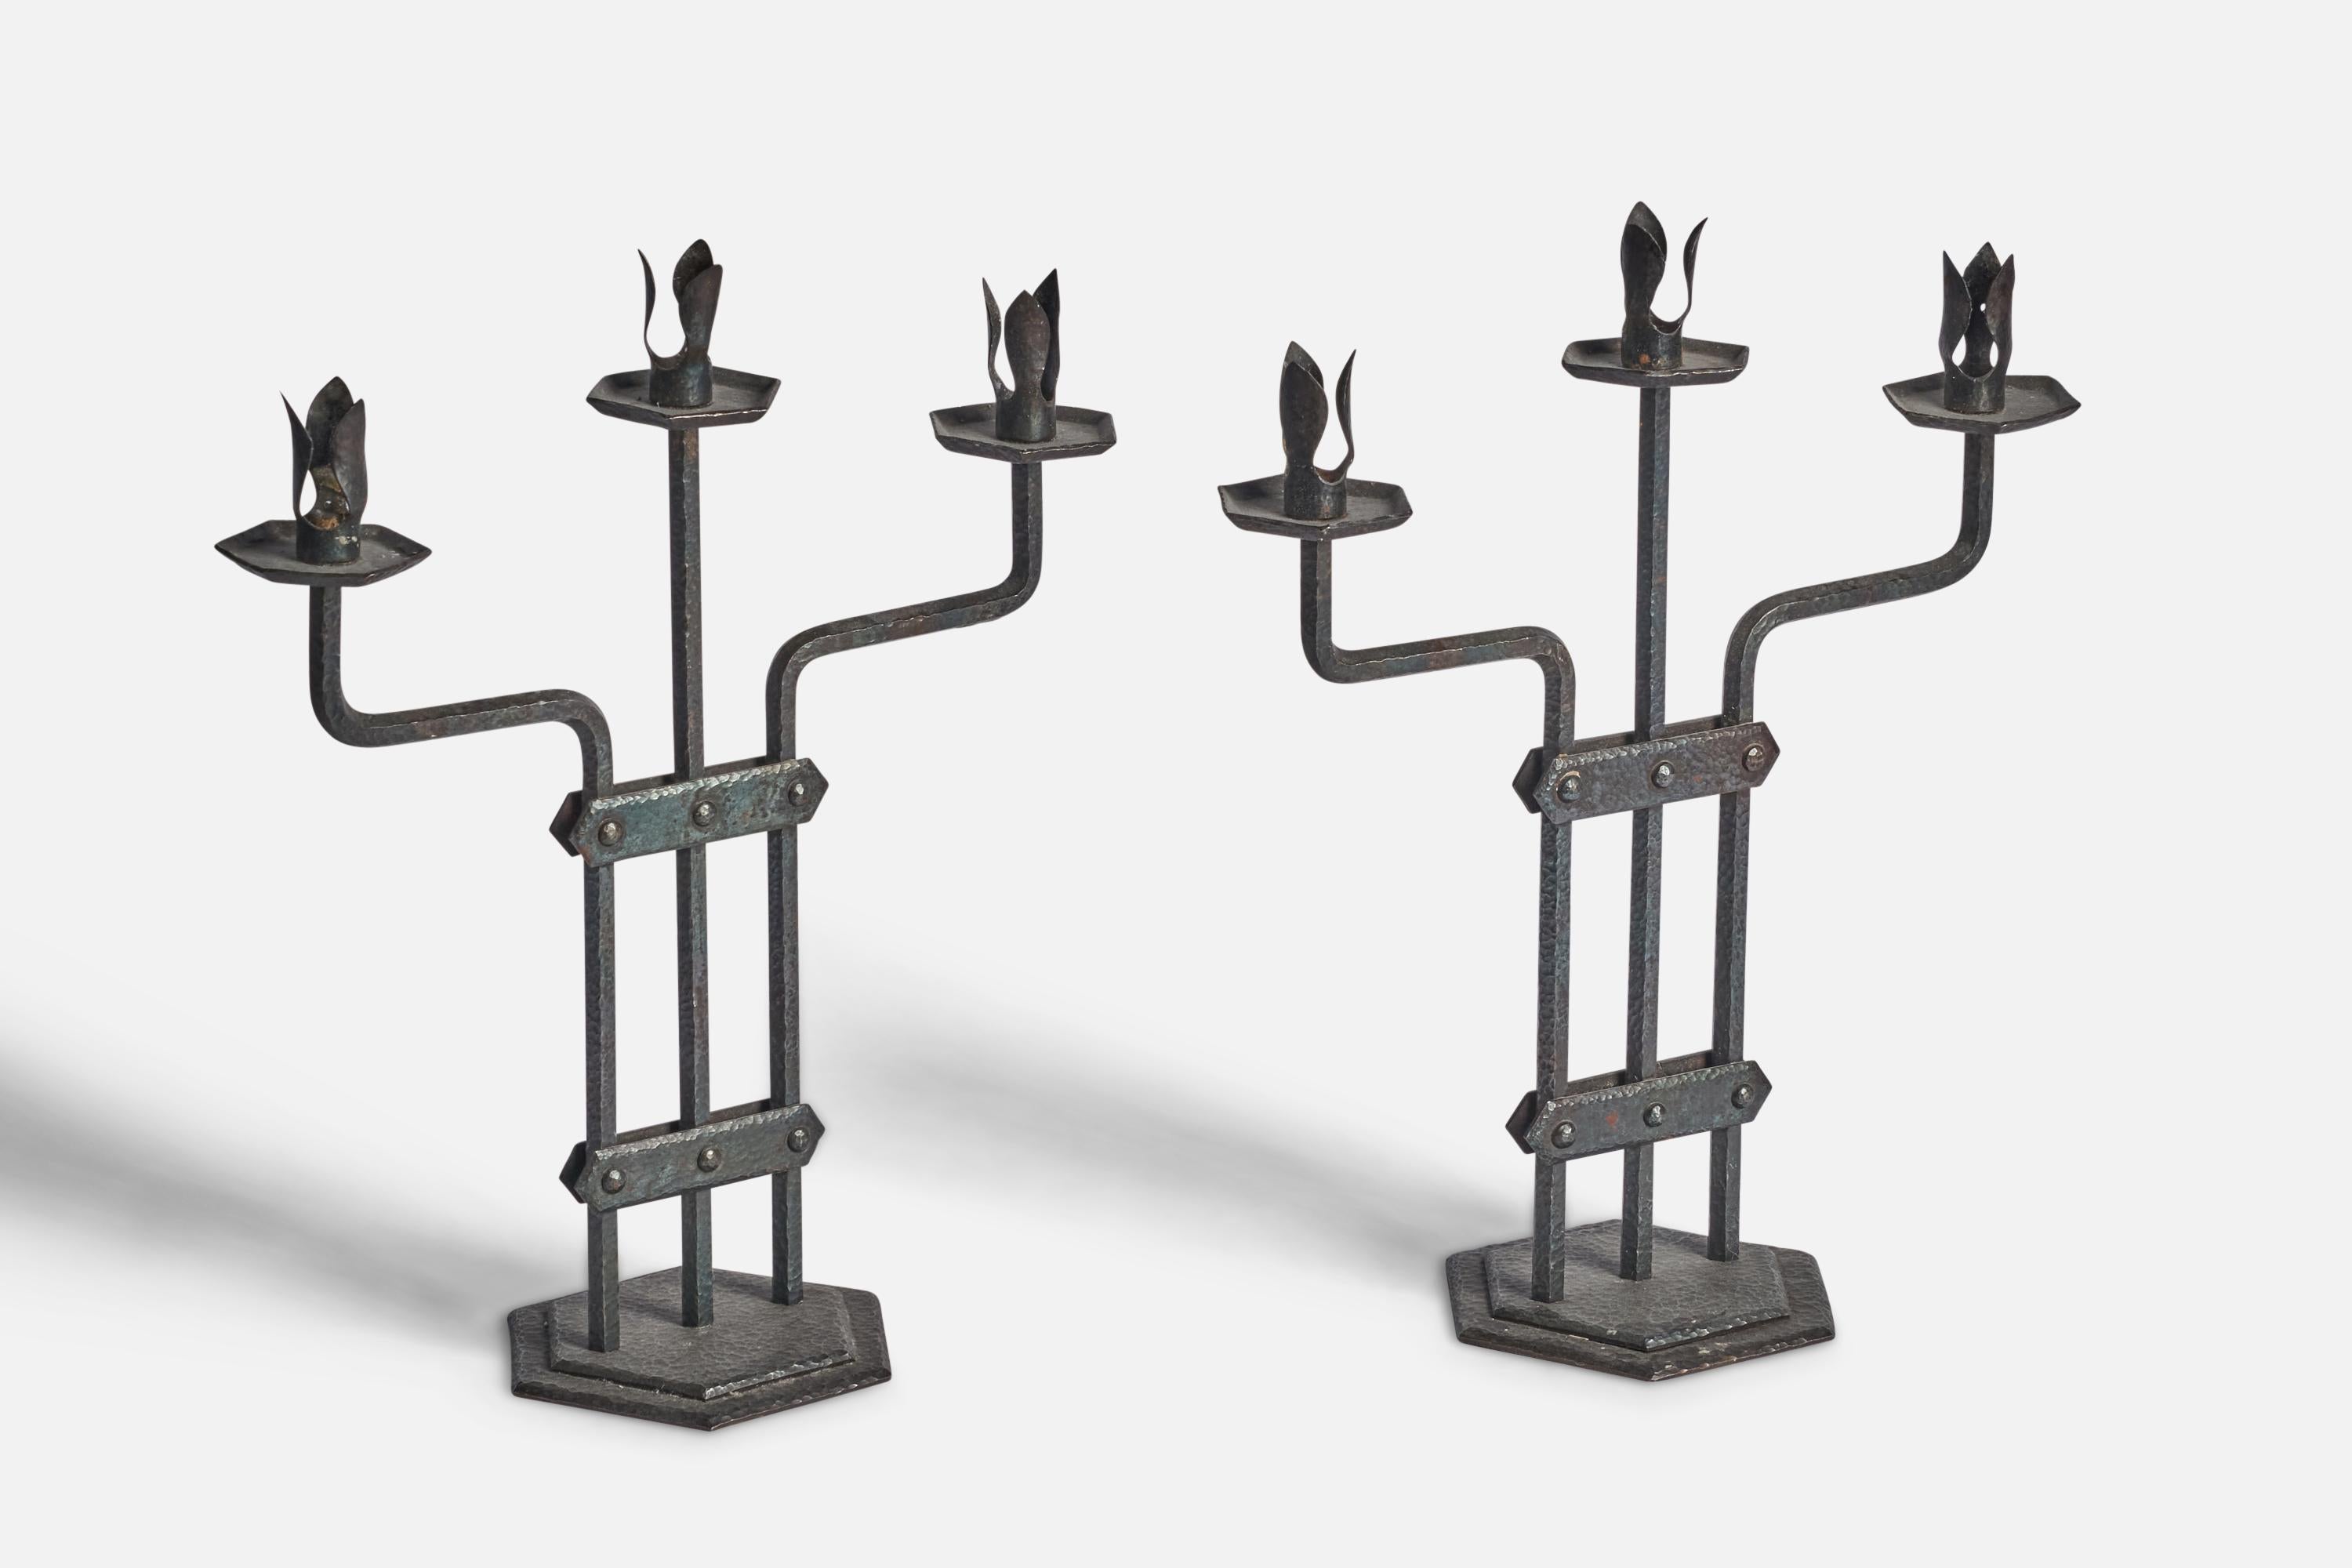 A pair of iron candelabras designed and produced in Sweden, c. 1940s.

fits 0.75” diameter candles